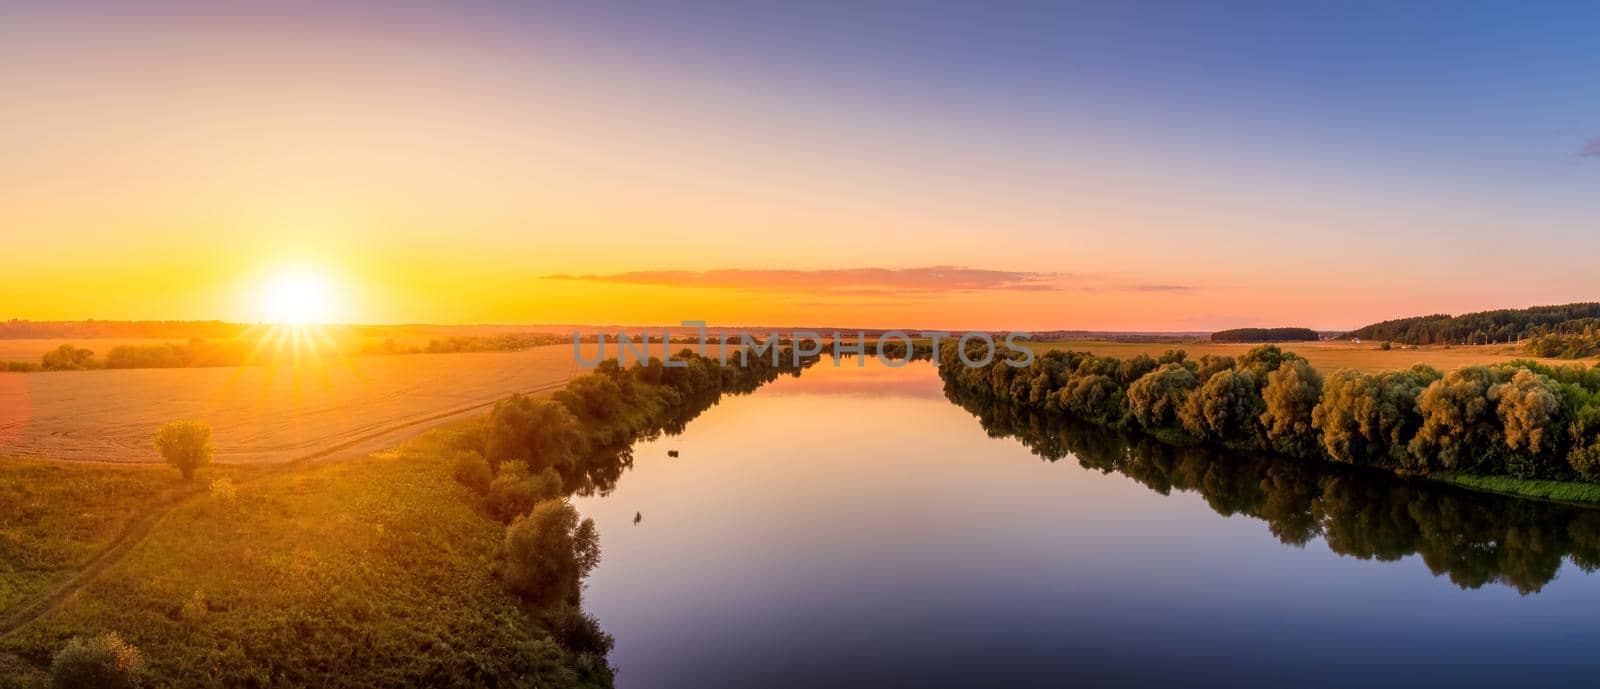 A sunset or sunrise scene over a lake or river with skies reflecting in the water on a summer evening or morning. Panorama.